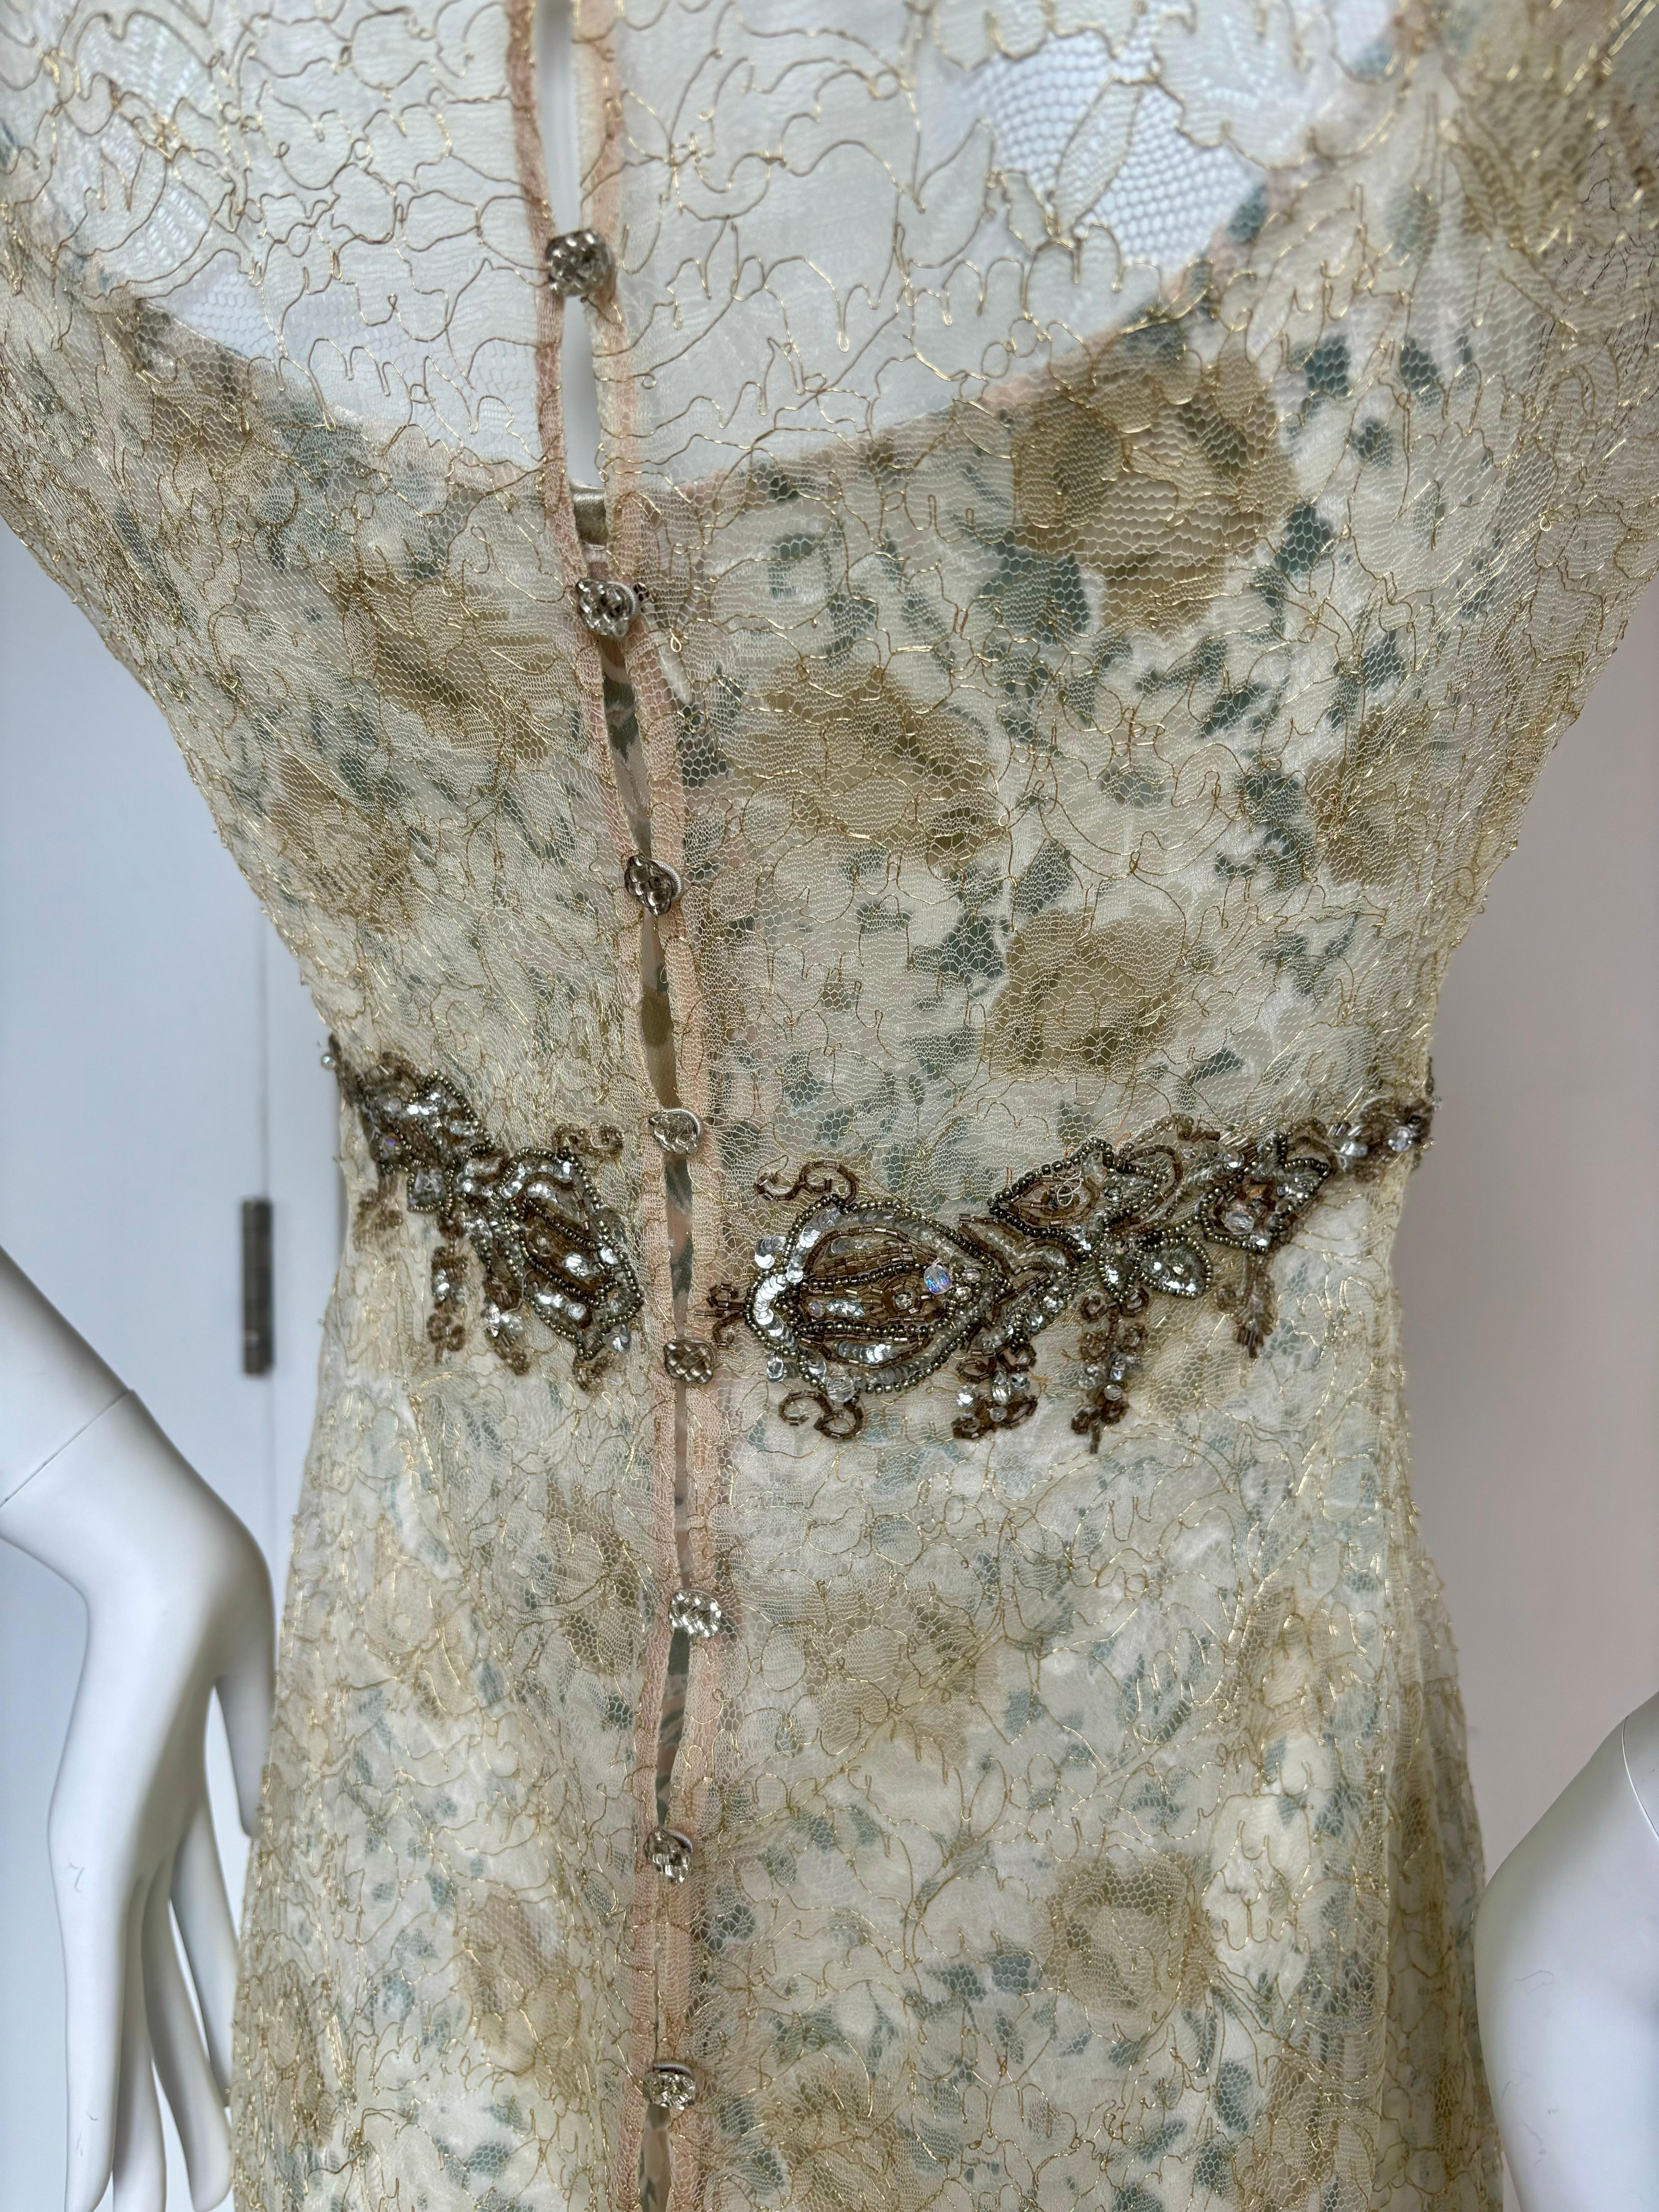 BADGLEY MISCHKA Vintage Slip Gown w. Delicate Lace Embellished Overlay Maxi  For Sale 5